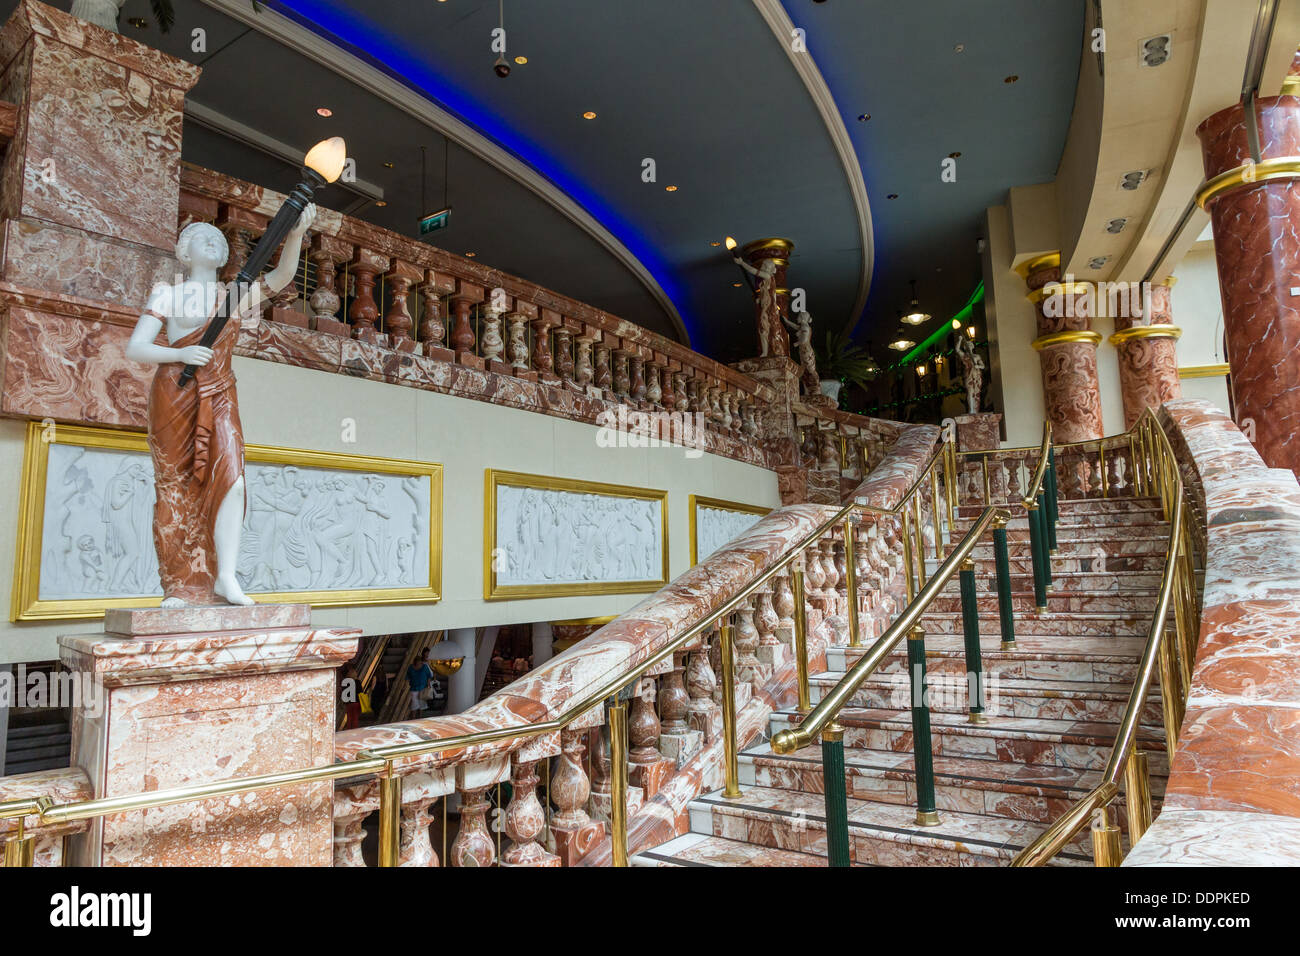 The marble staircase in The Great Hall at Into Trafford Centre, Manchester, England. Stock Photo